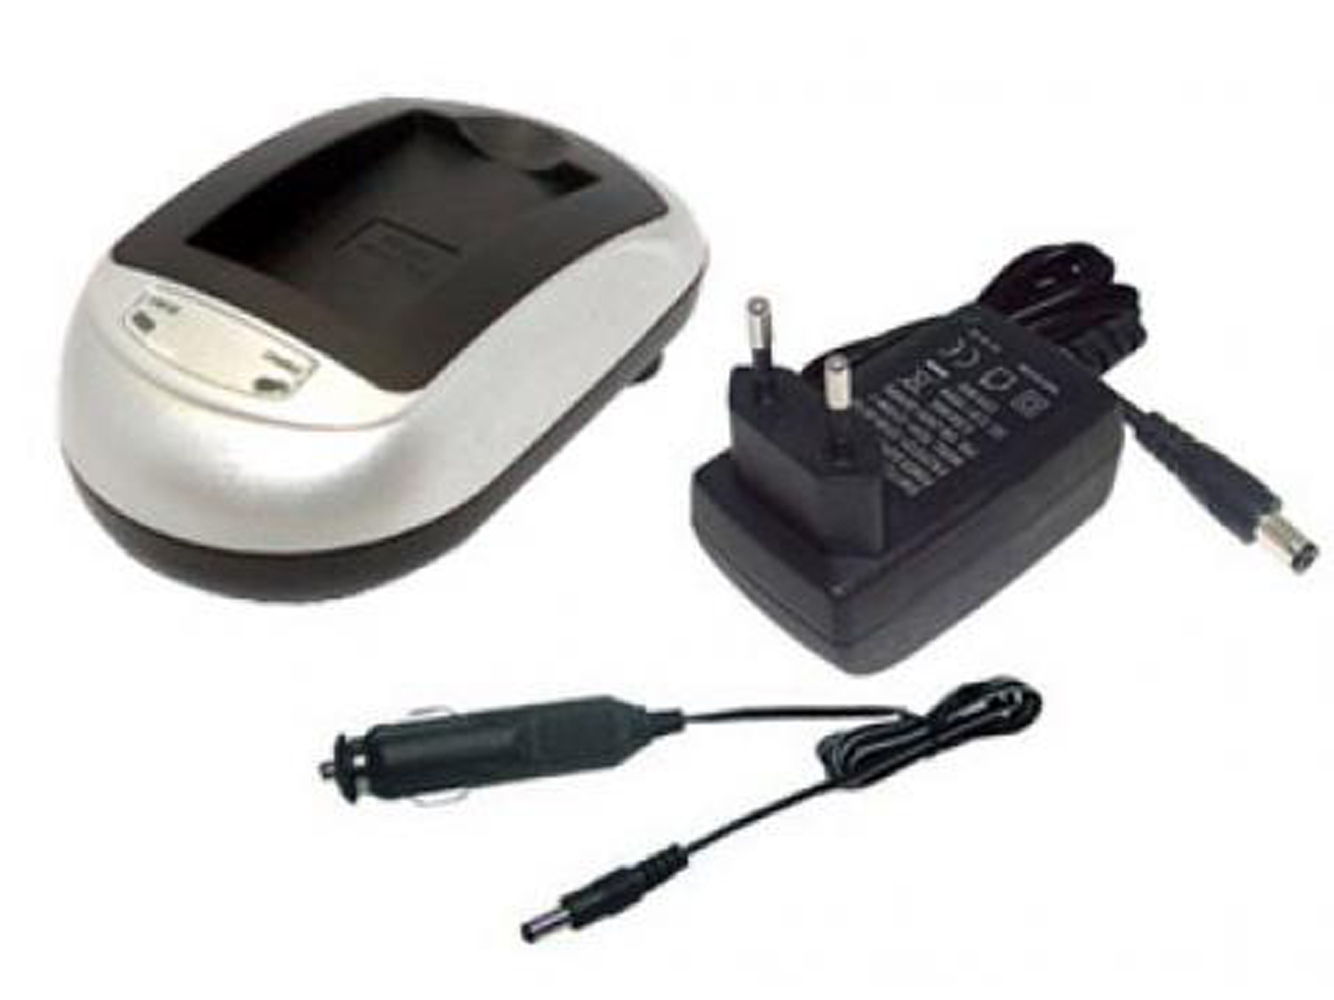 Casio Np-90 Battery Chargers For Casio Exilim Ex-fh100, Casio Exilim Ex-fh100bk replacement